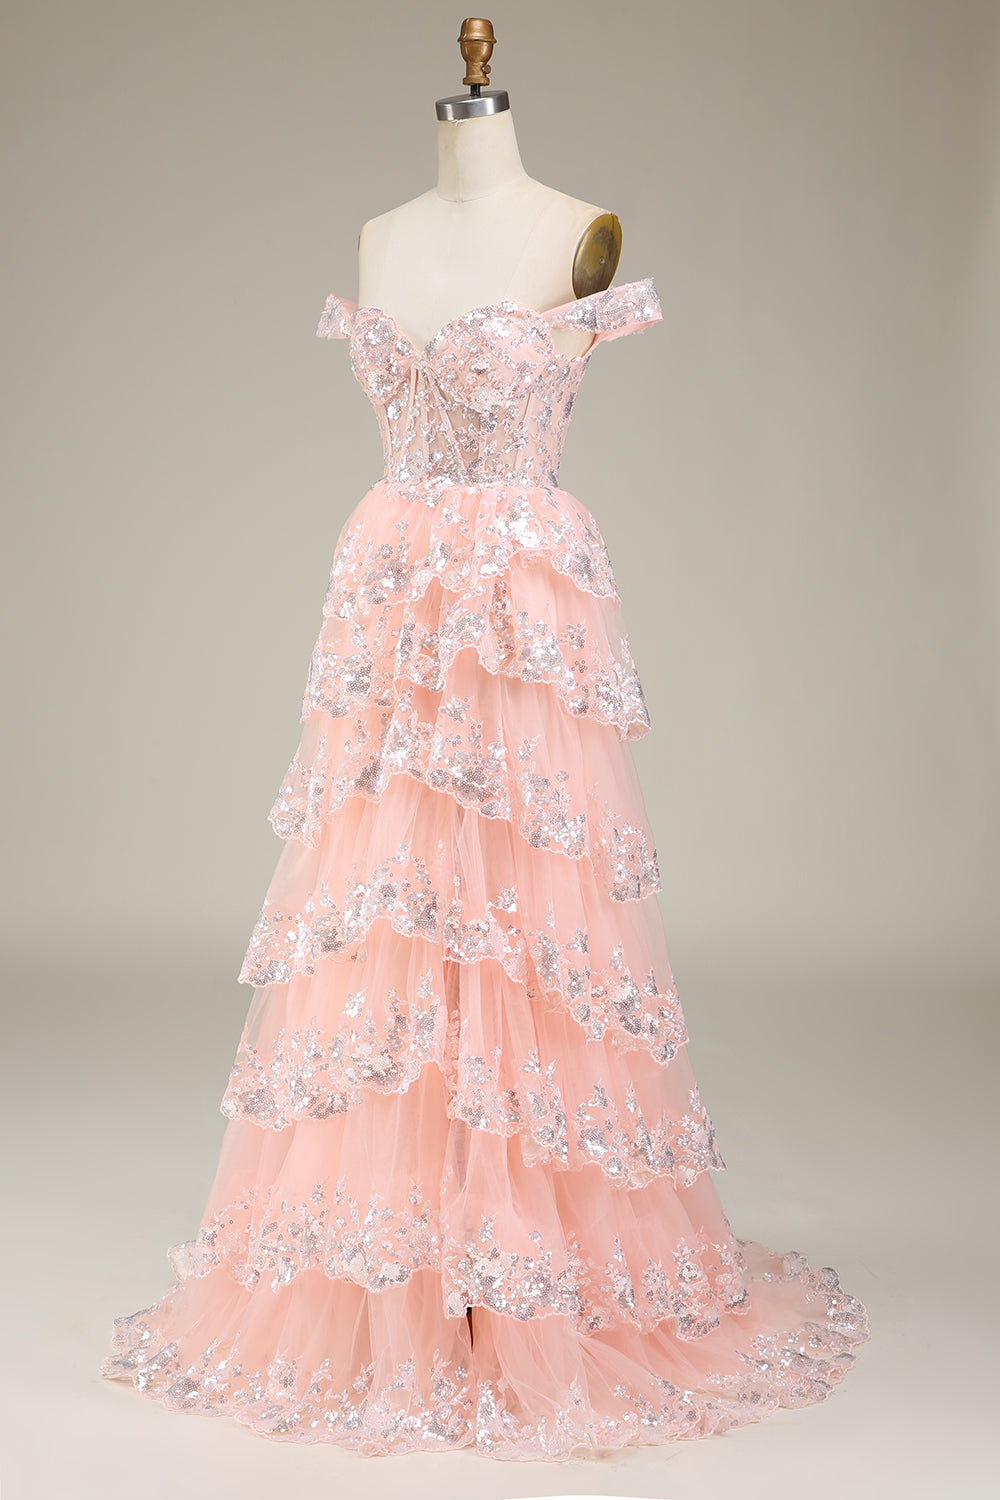 Blush Off The Shoulder Tiered Prom Dress